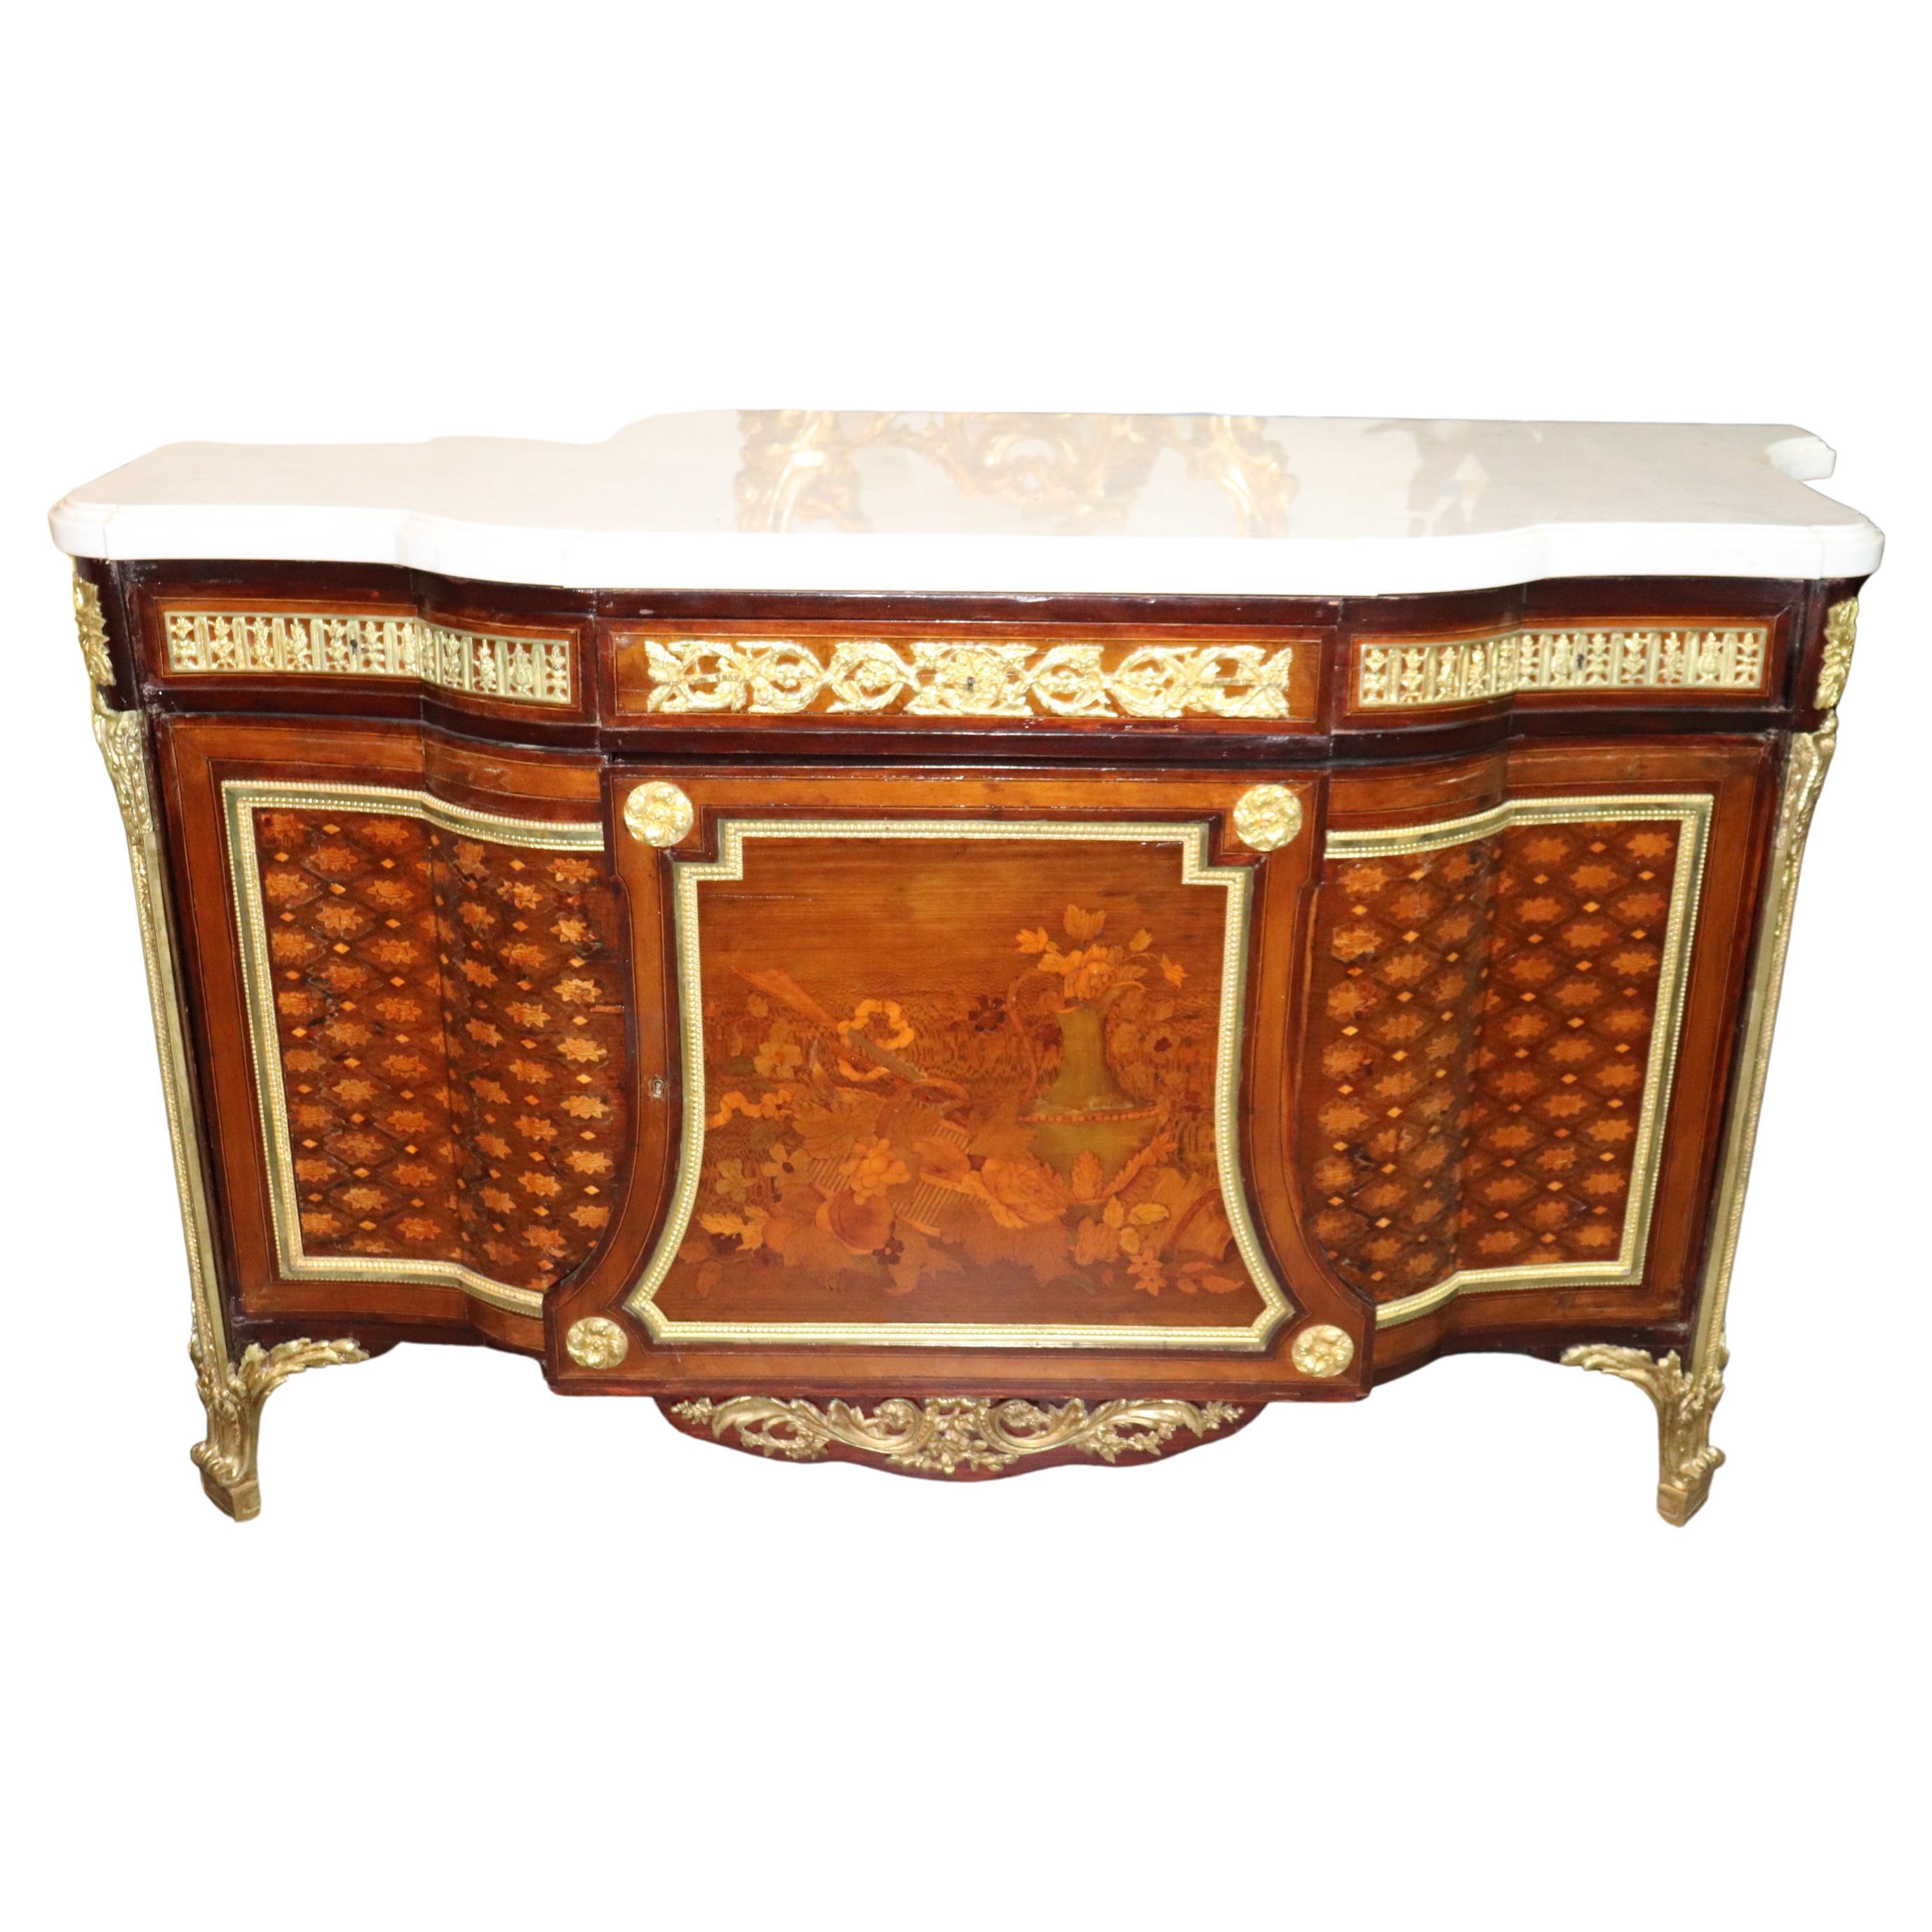 Fine Inlaid Palace Sized French Louis XV Marble Top Commode, circa 1870s For Sale